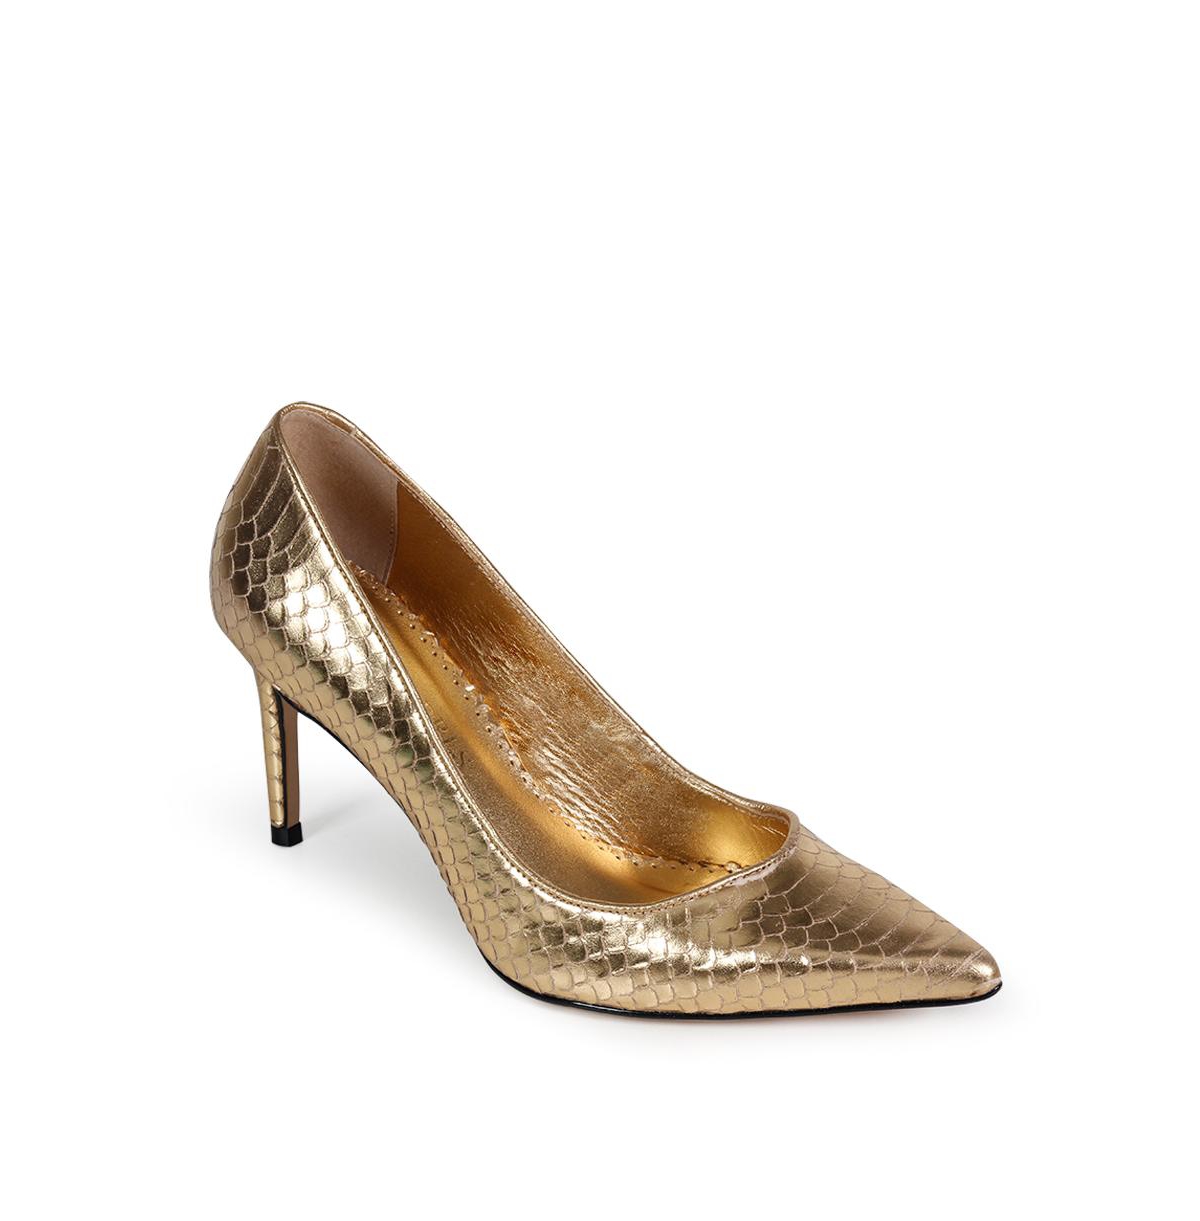 Shoes Women's Torres Pointed-Toe Stiletto Pumps - Gold